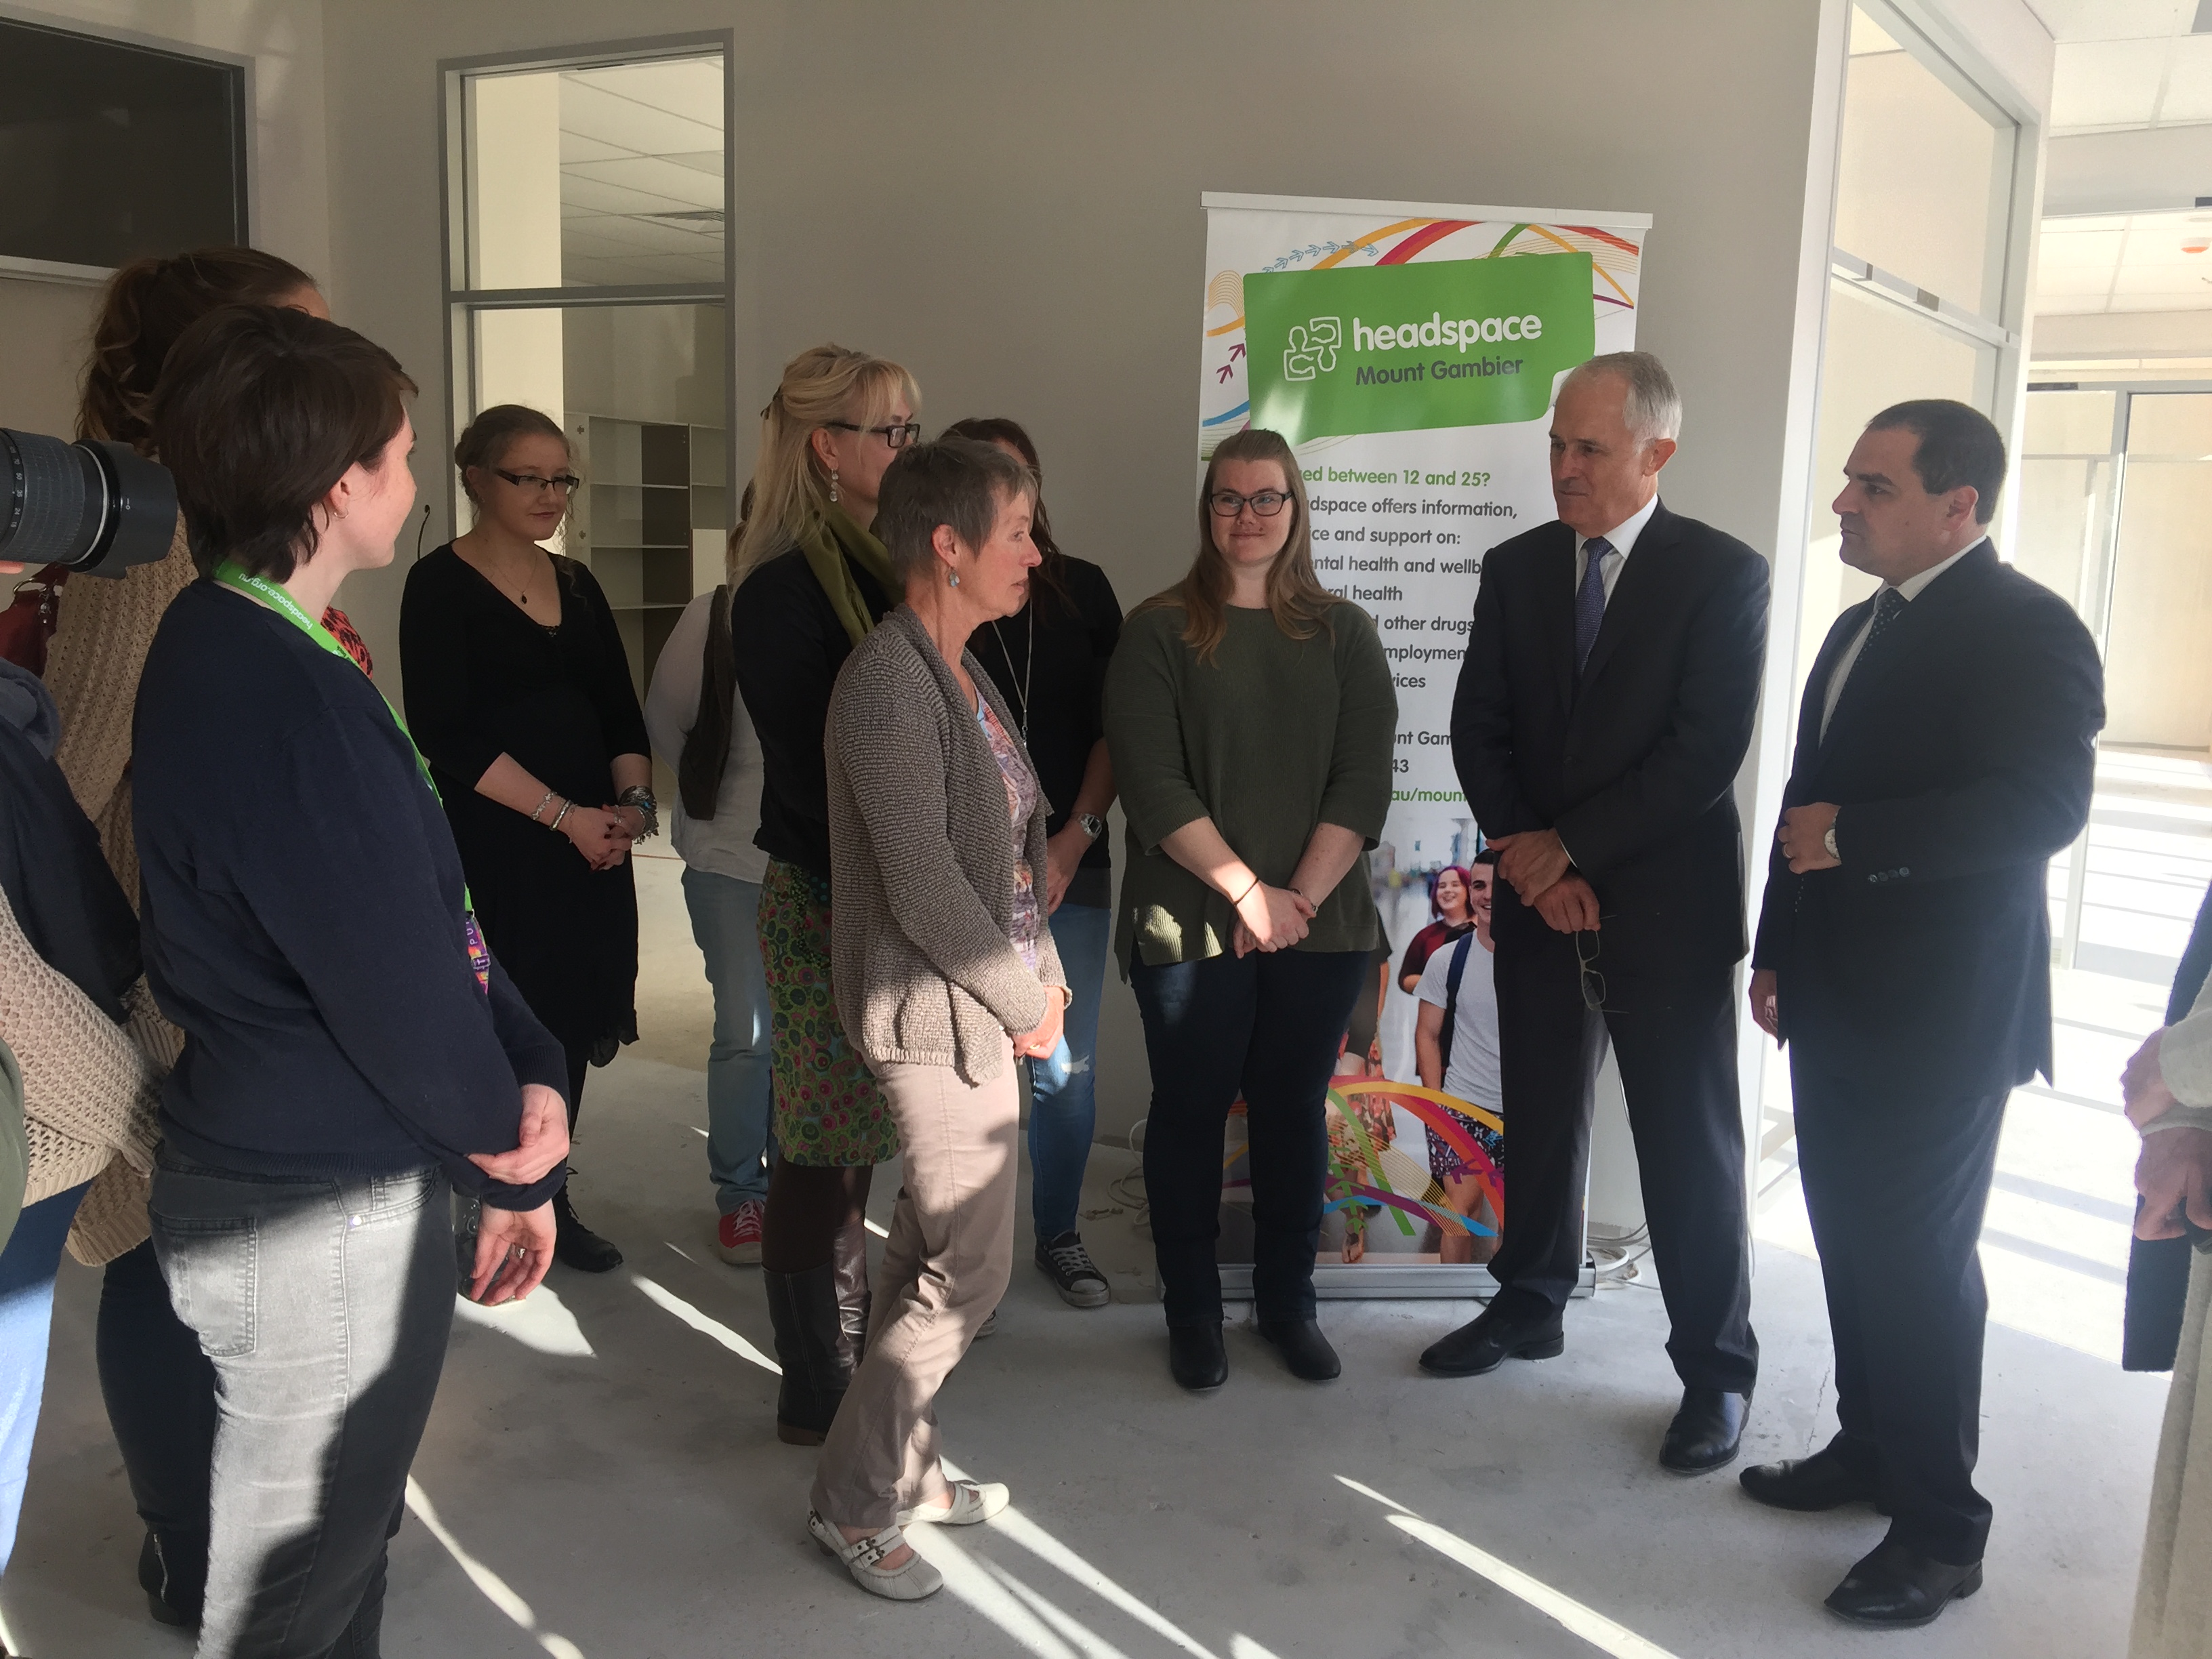 Prime Minister Turnbull visits Mount Gambier